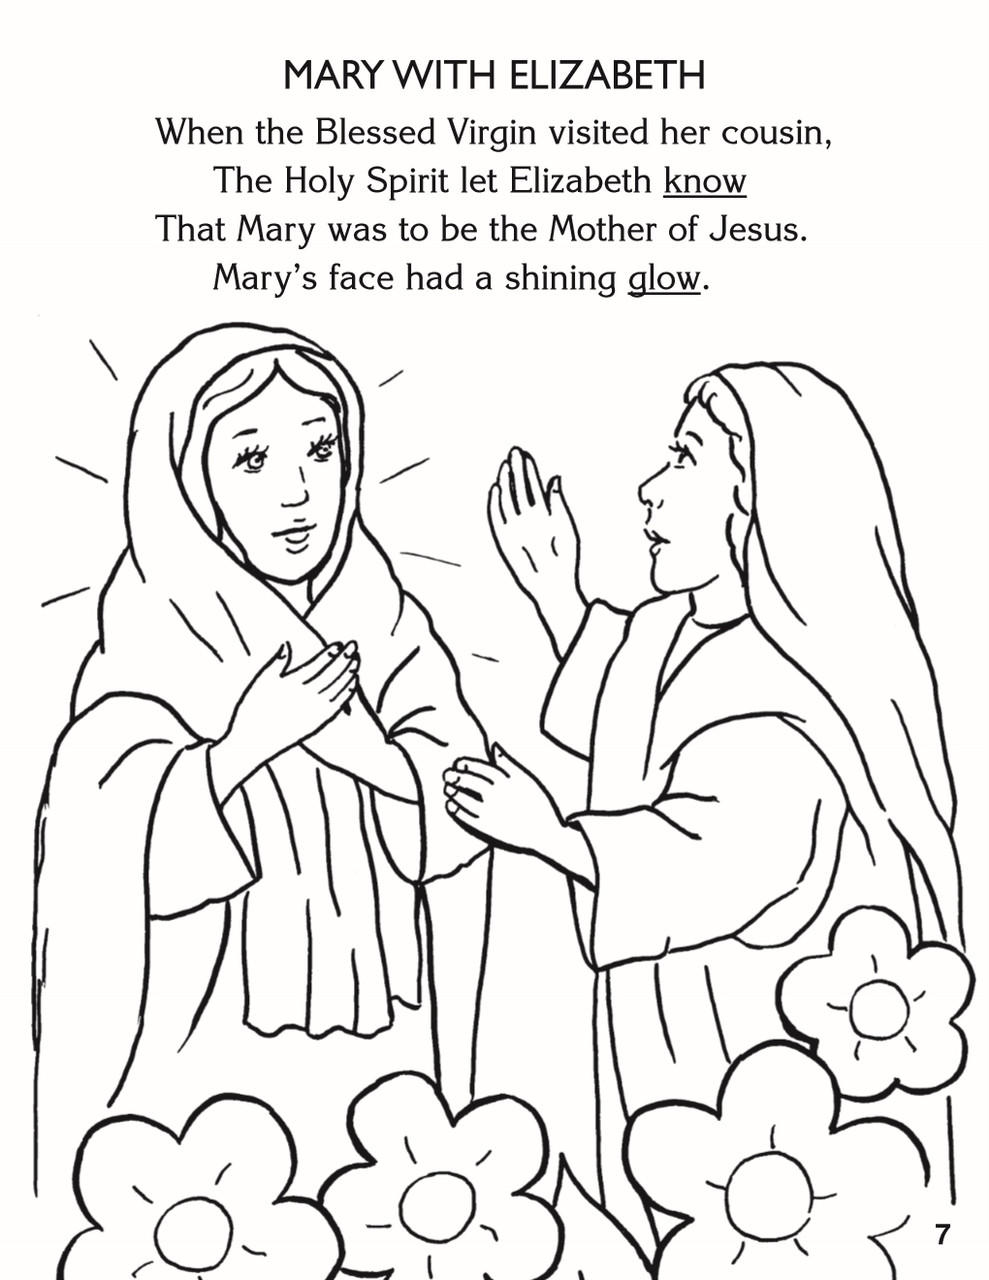 St joseph mary coloring book